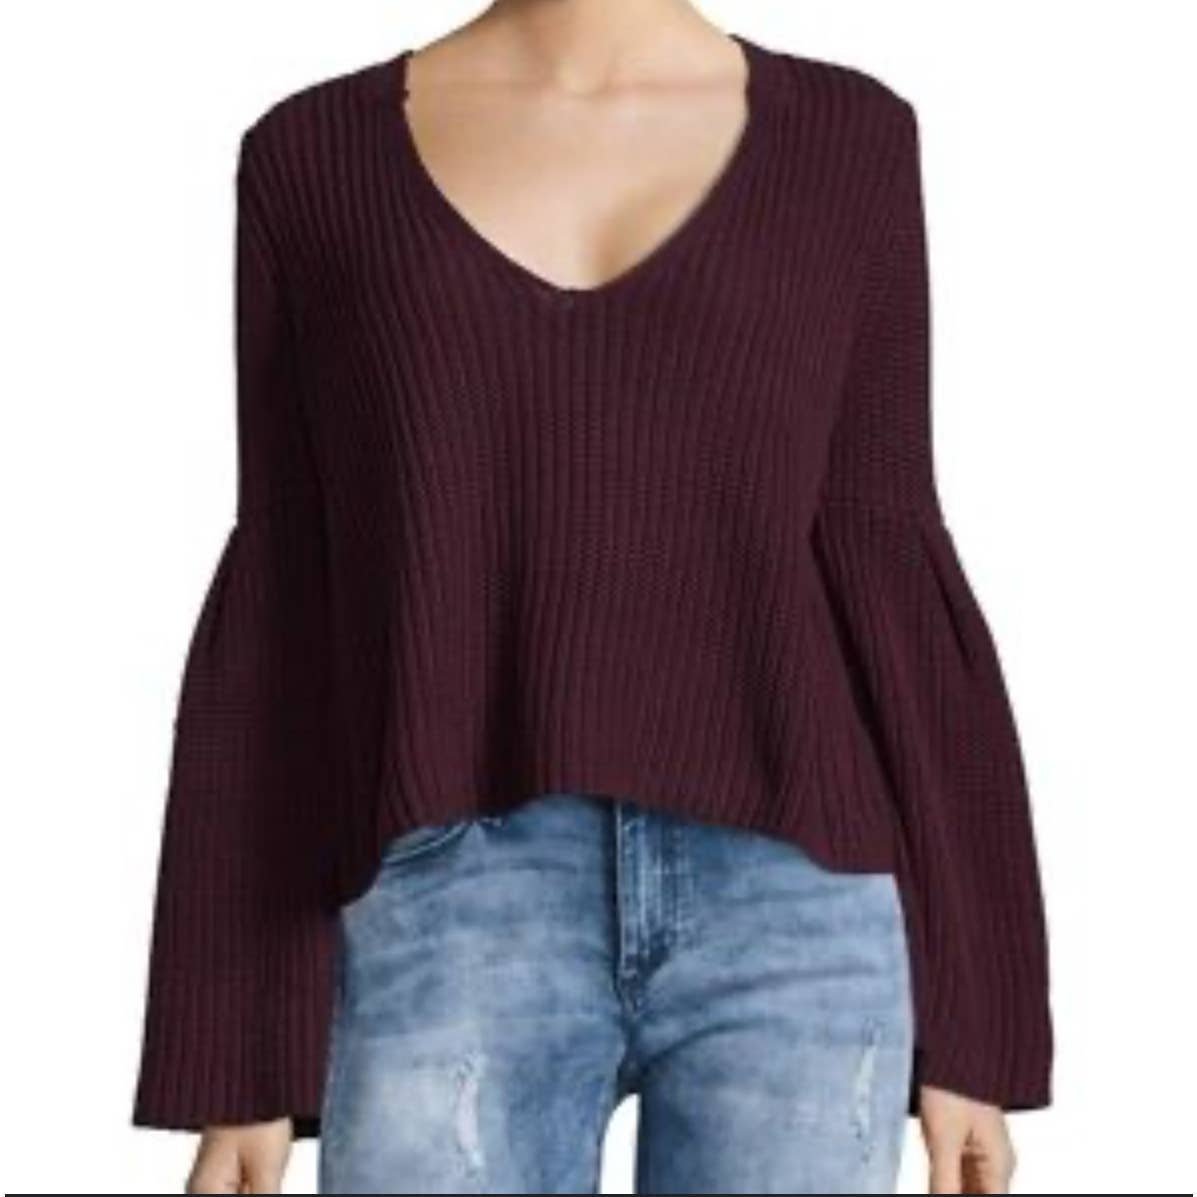 Wholesale price Free People Damsel Bell Sleeve deep purple Pullover Cropped Knit Sweater M fv7VPjRzS outlet online shop